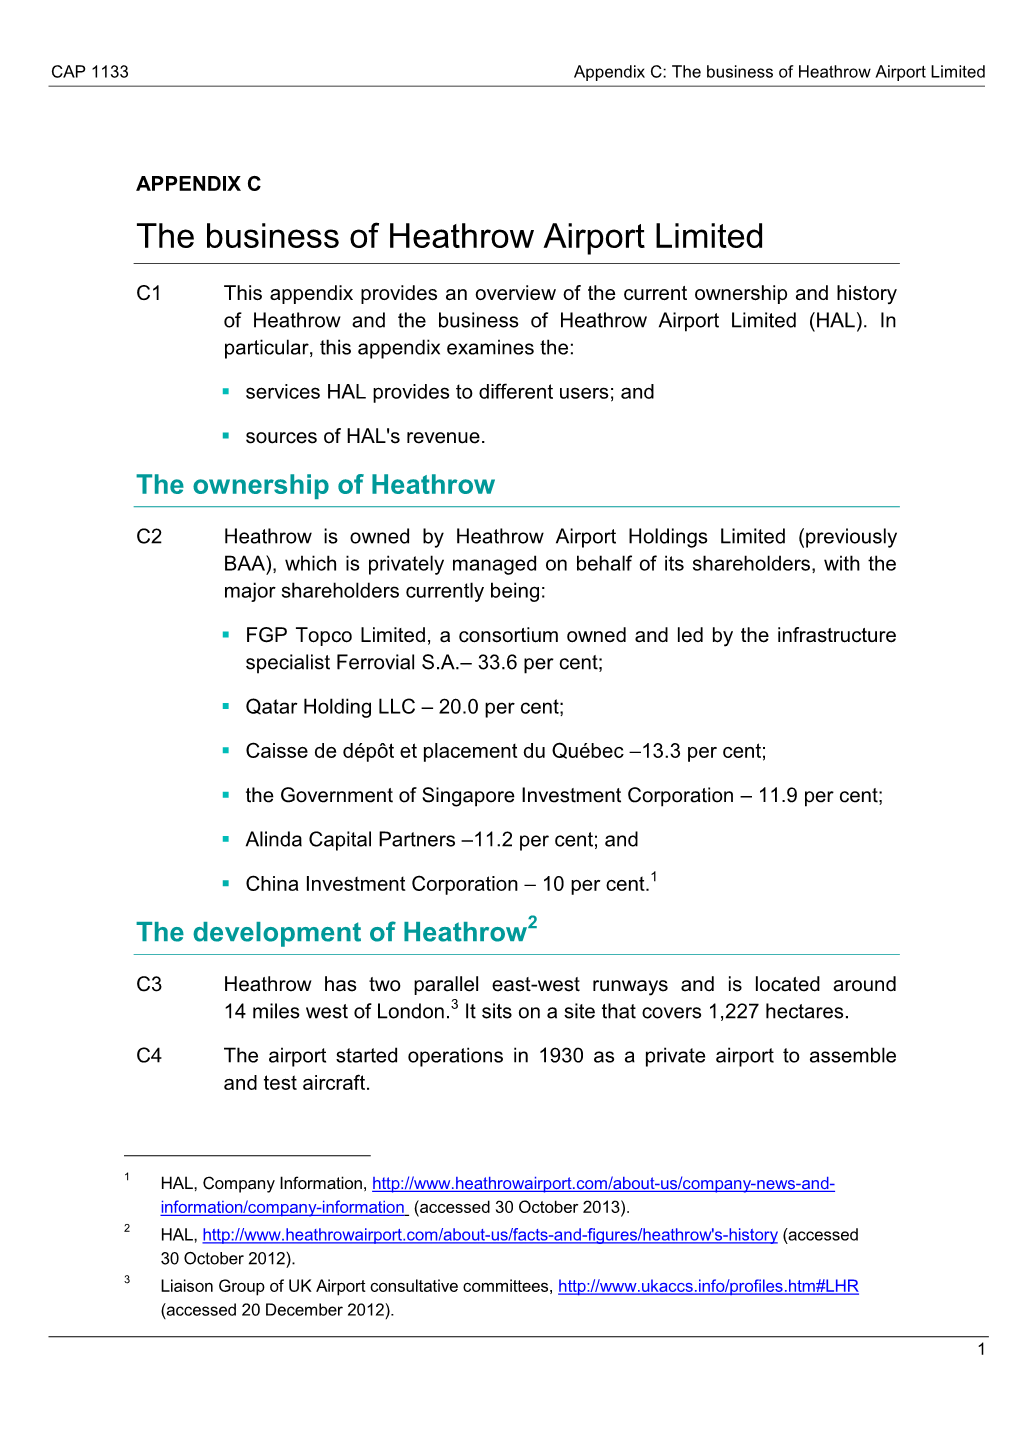 The Business of Heathrow Airport Limited